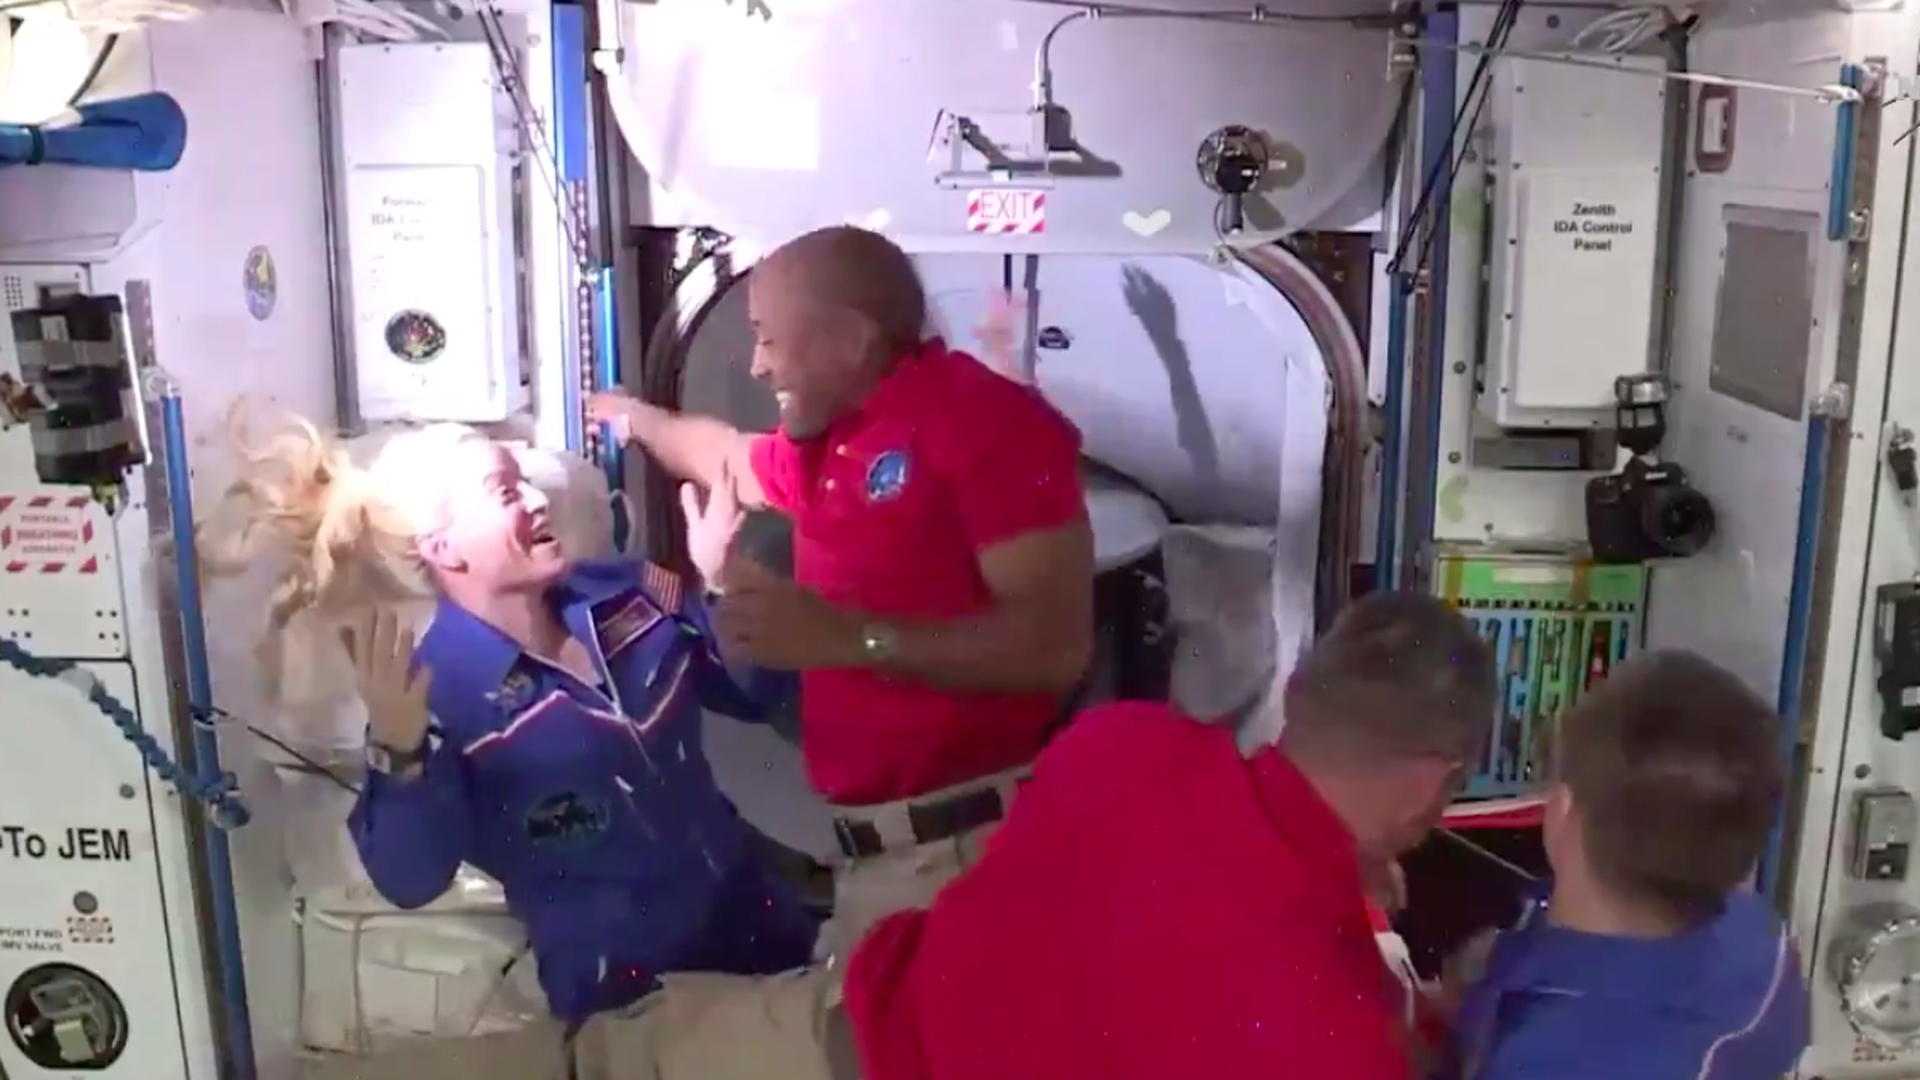 NASA astronauts Victor Glover and Kate Rubins hug as Glover comes aboard from his SpaceX Crew Dragon capsule